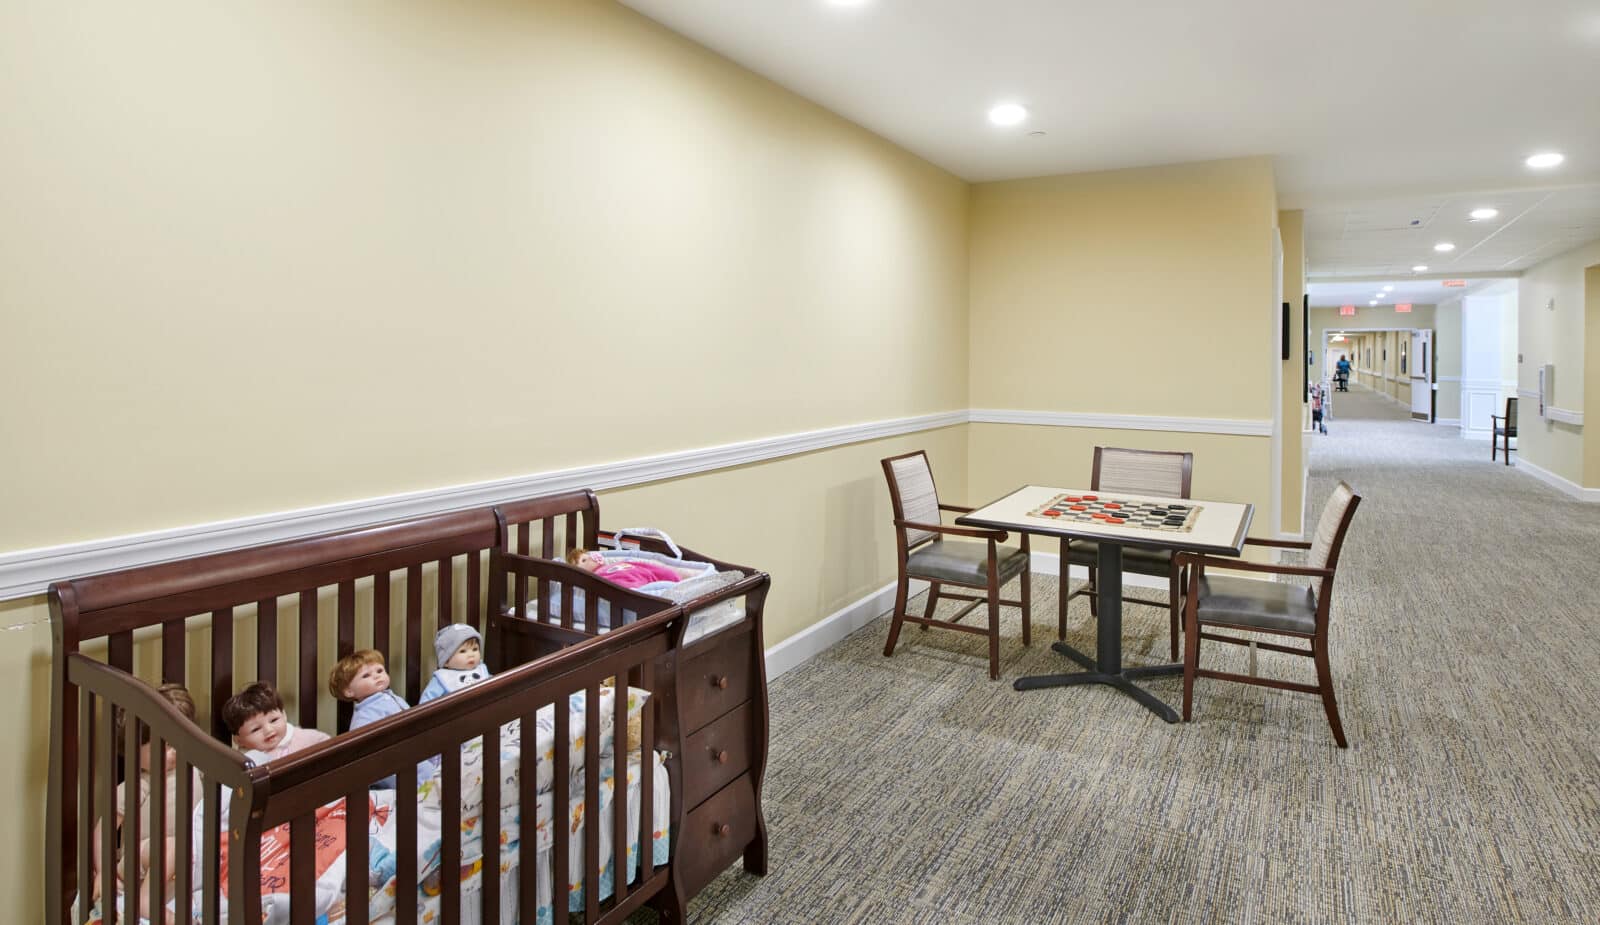 long hallway; table of checkers with three chairs and a crib with infant dolls and a changing station